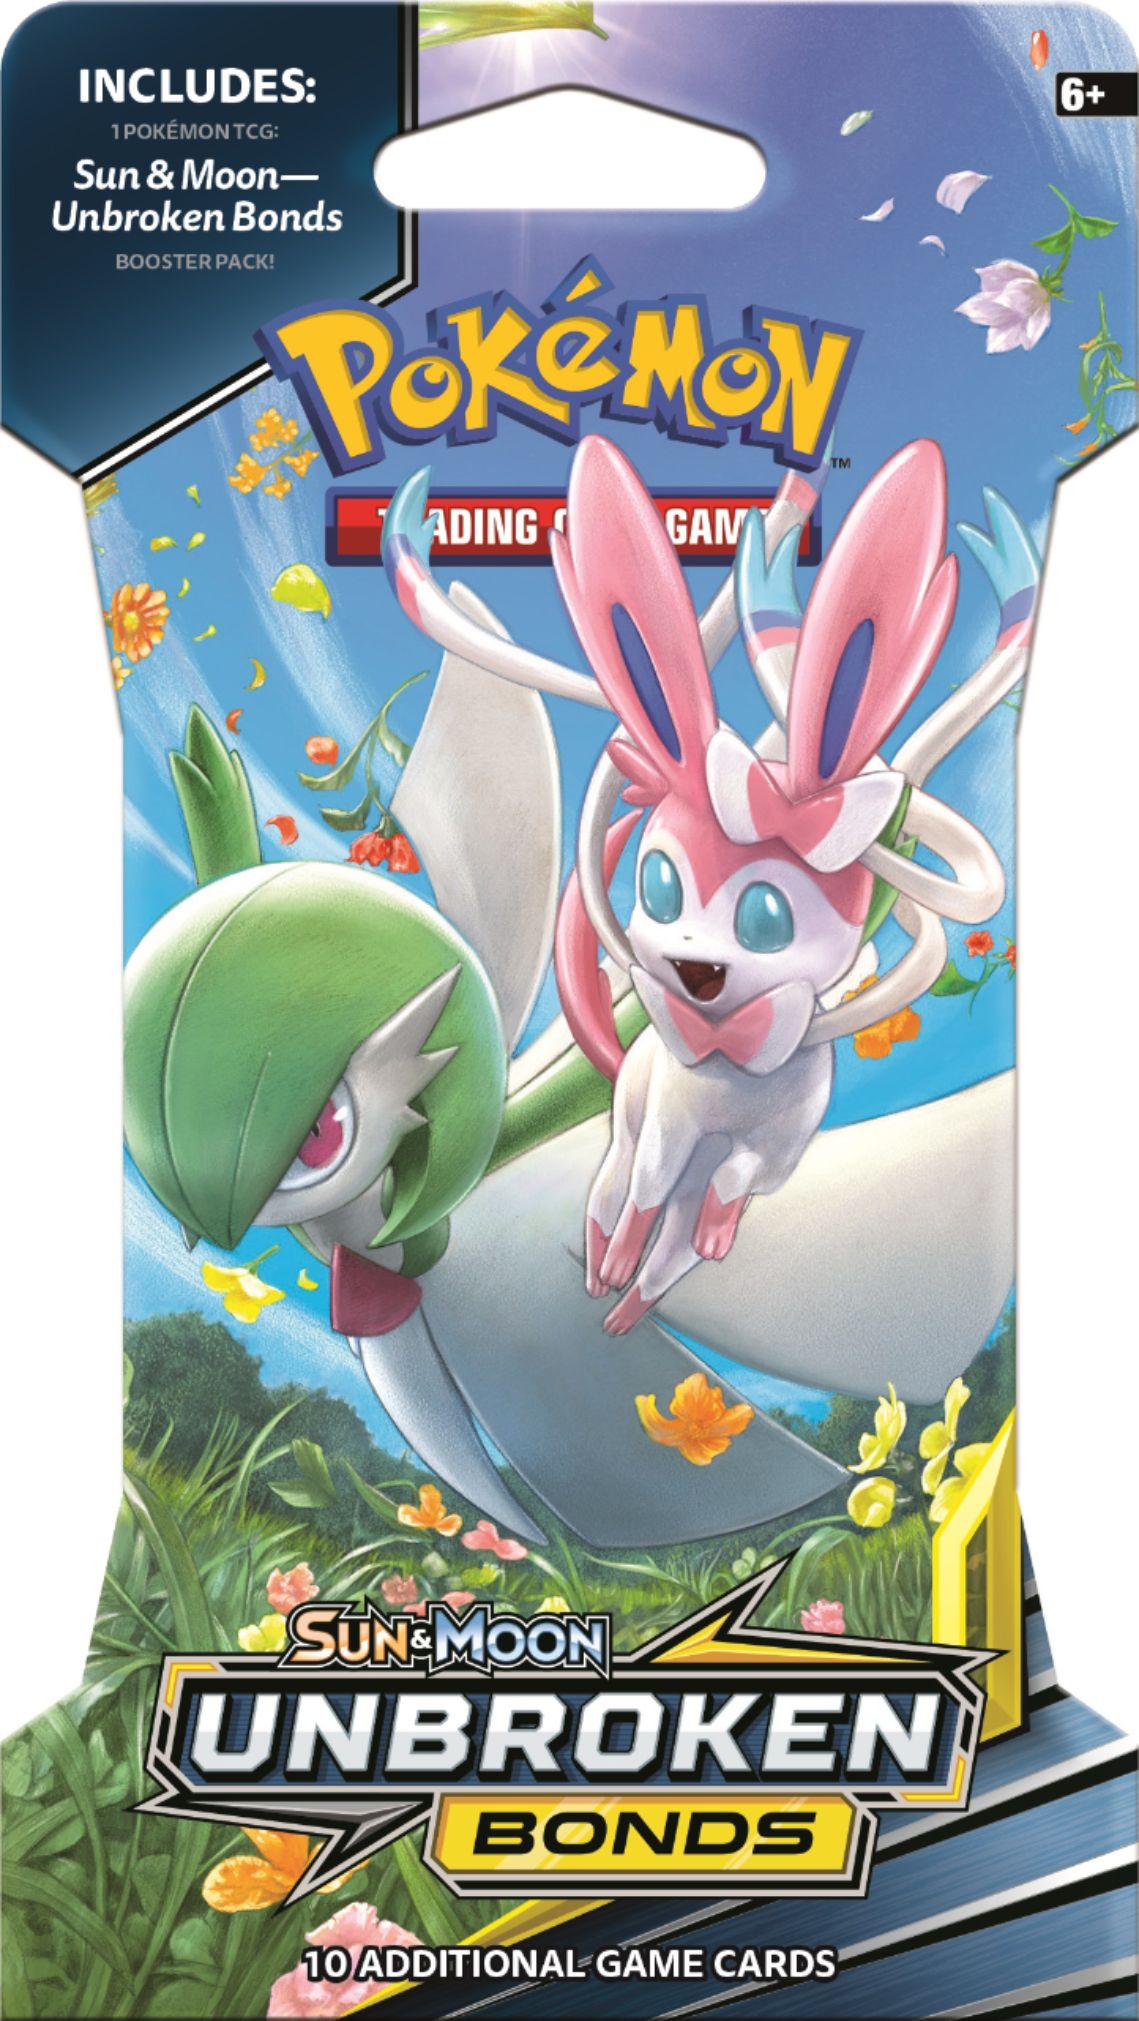 Best Buy: Pokémon Trading Card Game: Sun & Moon Unbroken Bonds Sleeved Booster May Vary 80548